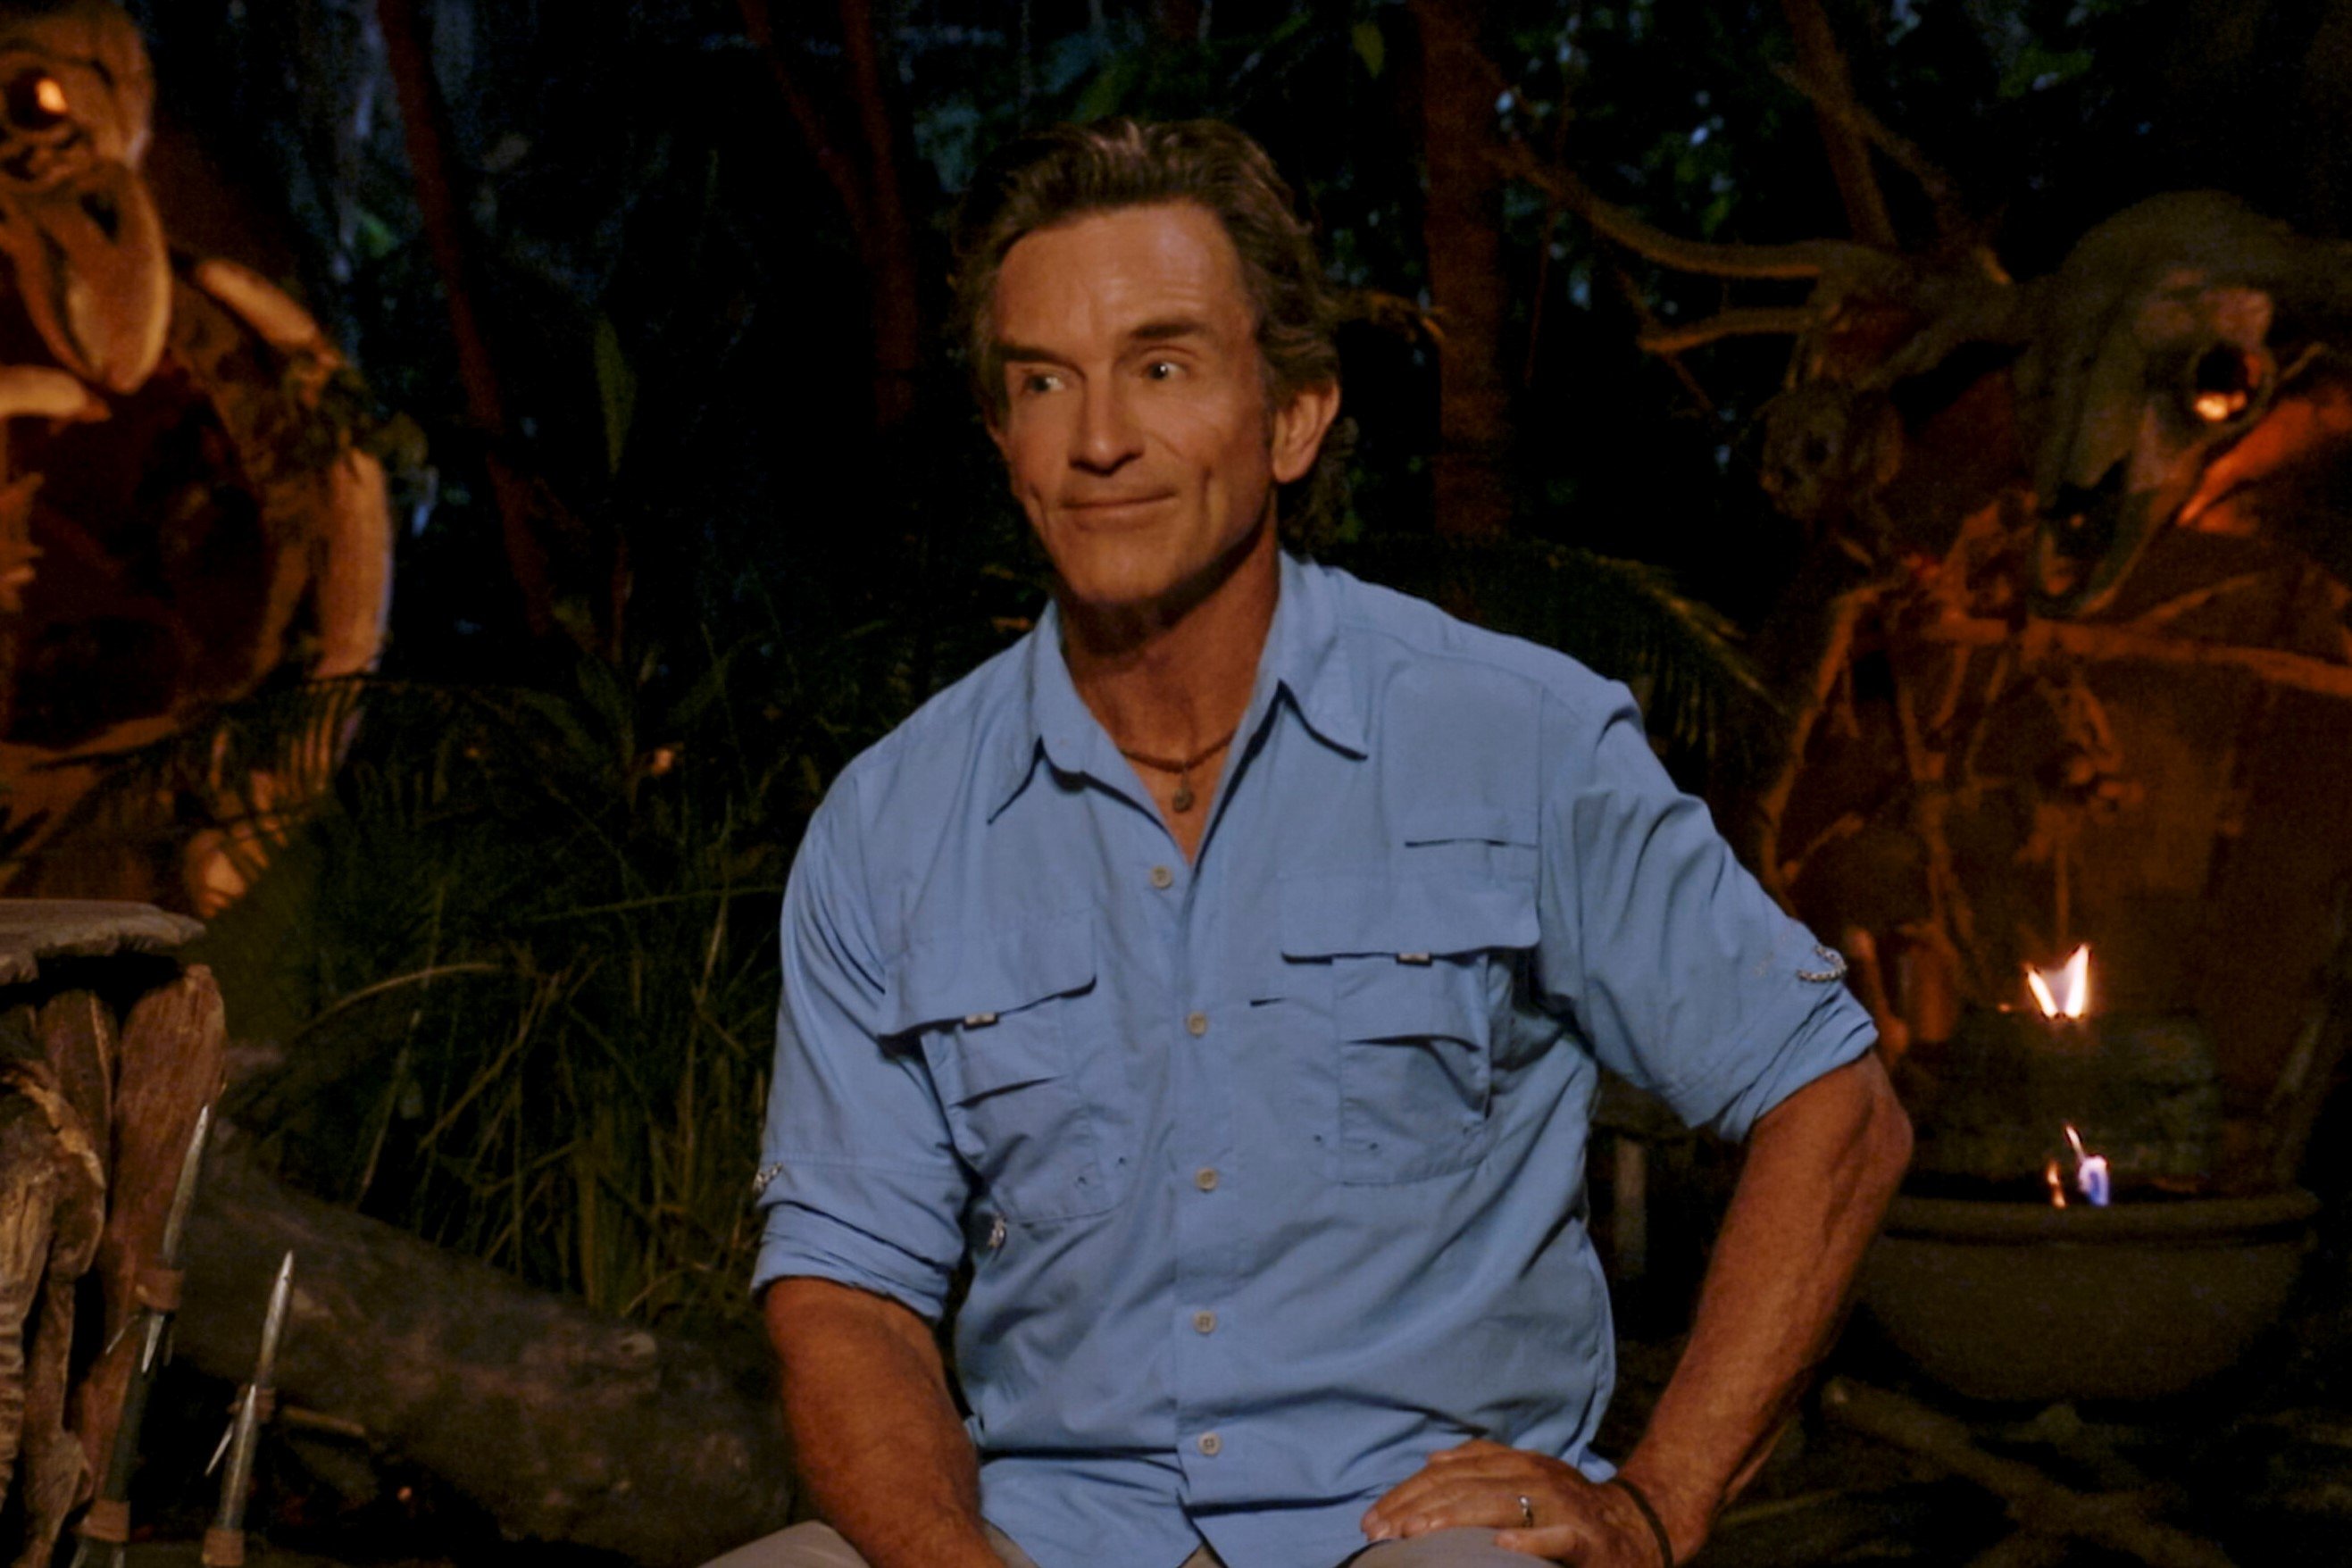 Jeff Probst, the host of 'Survivor 43' on CBS, wears a light blue button-up shirt with rolled-up sleeves at Tribal Council.